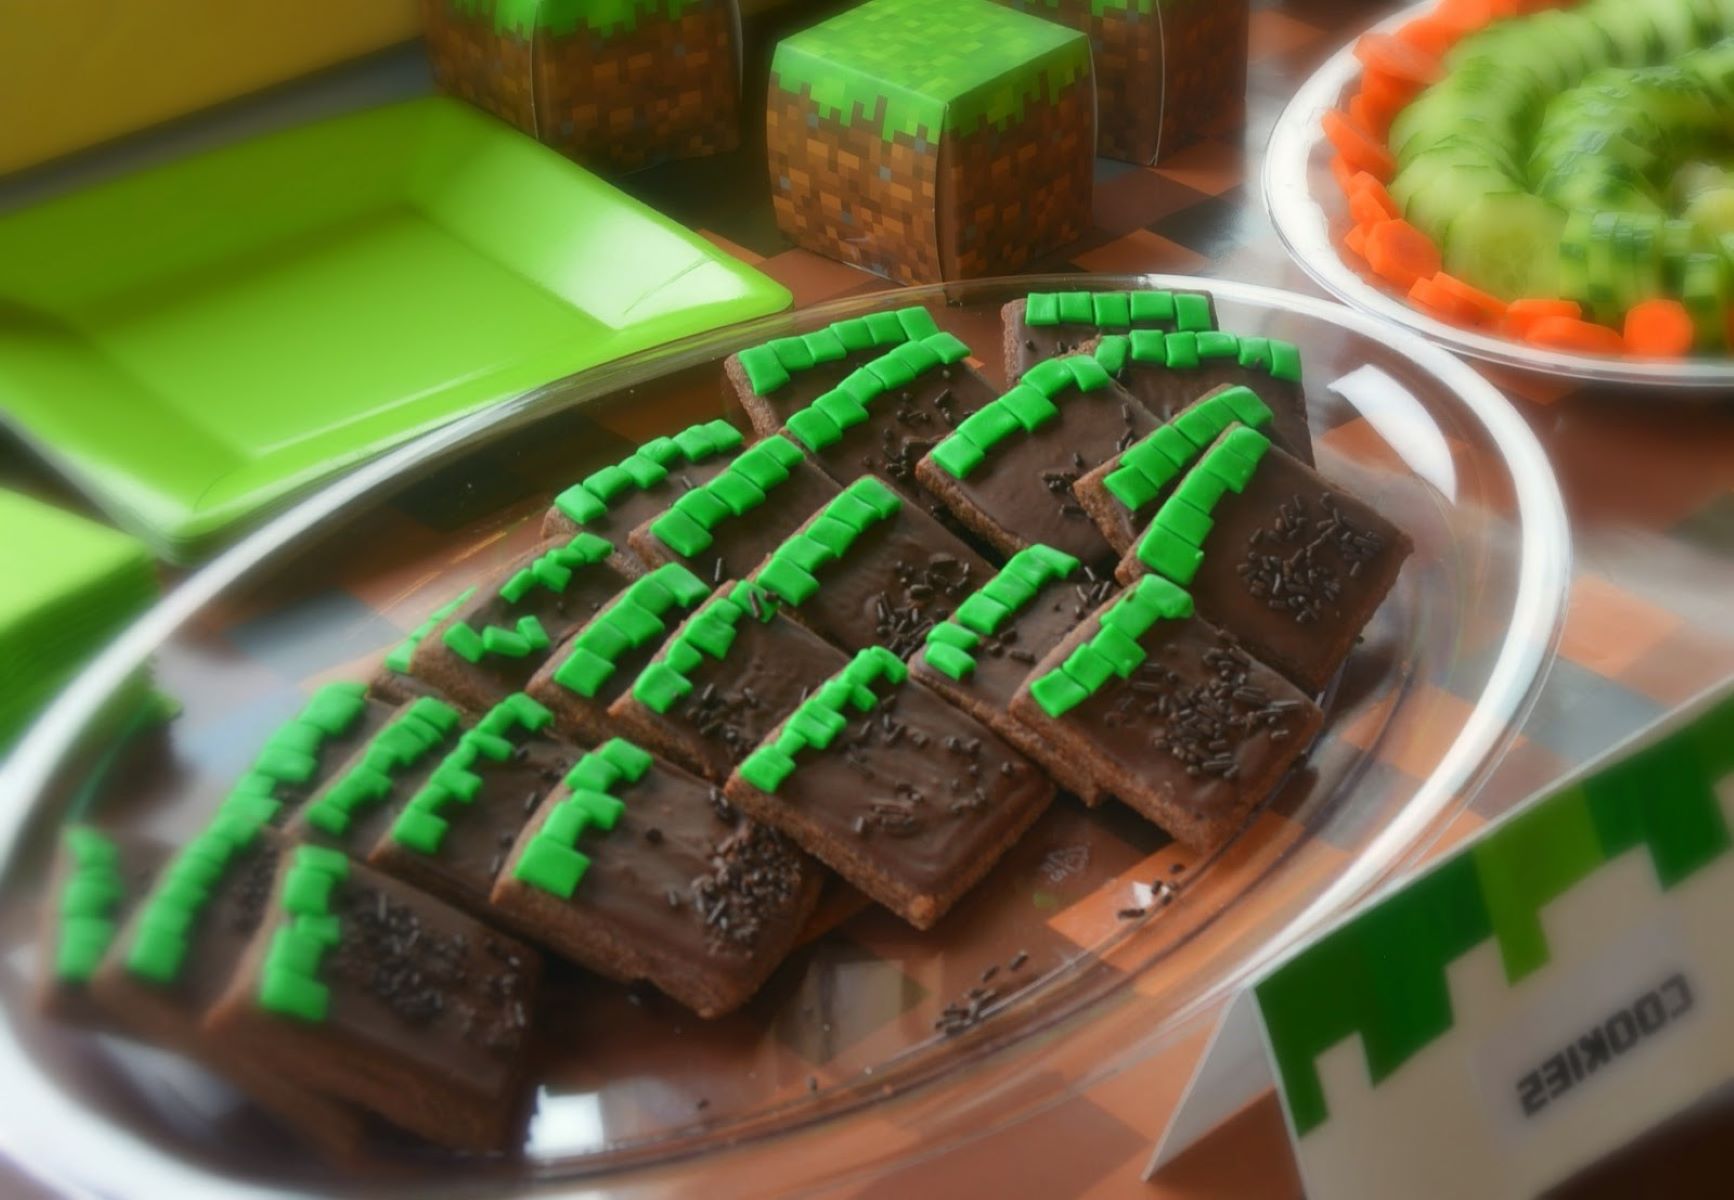 How To Make Delicious Minecraft-Inspired Cookies